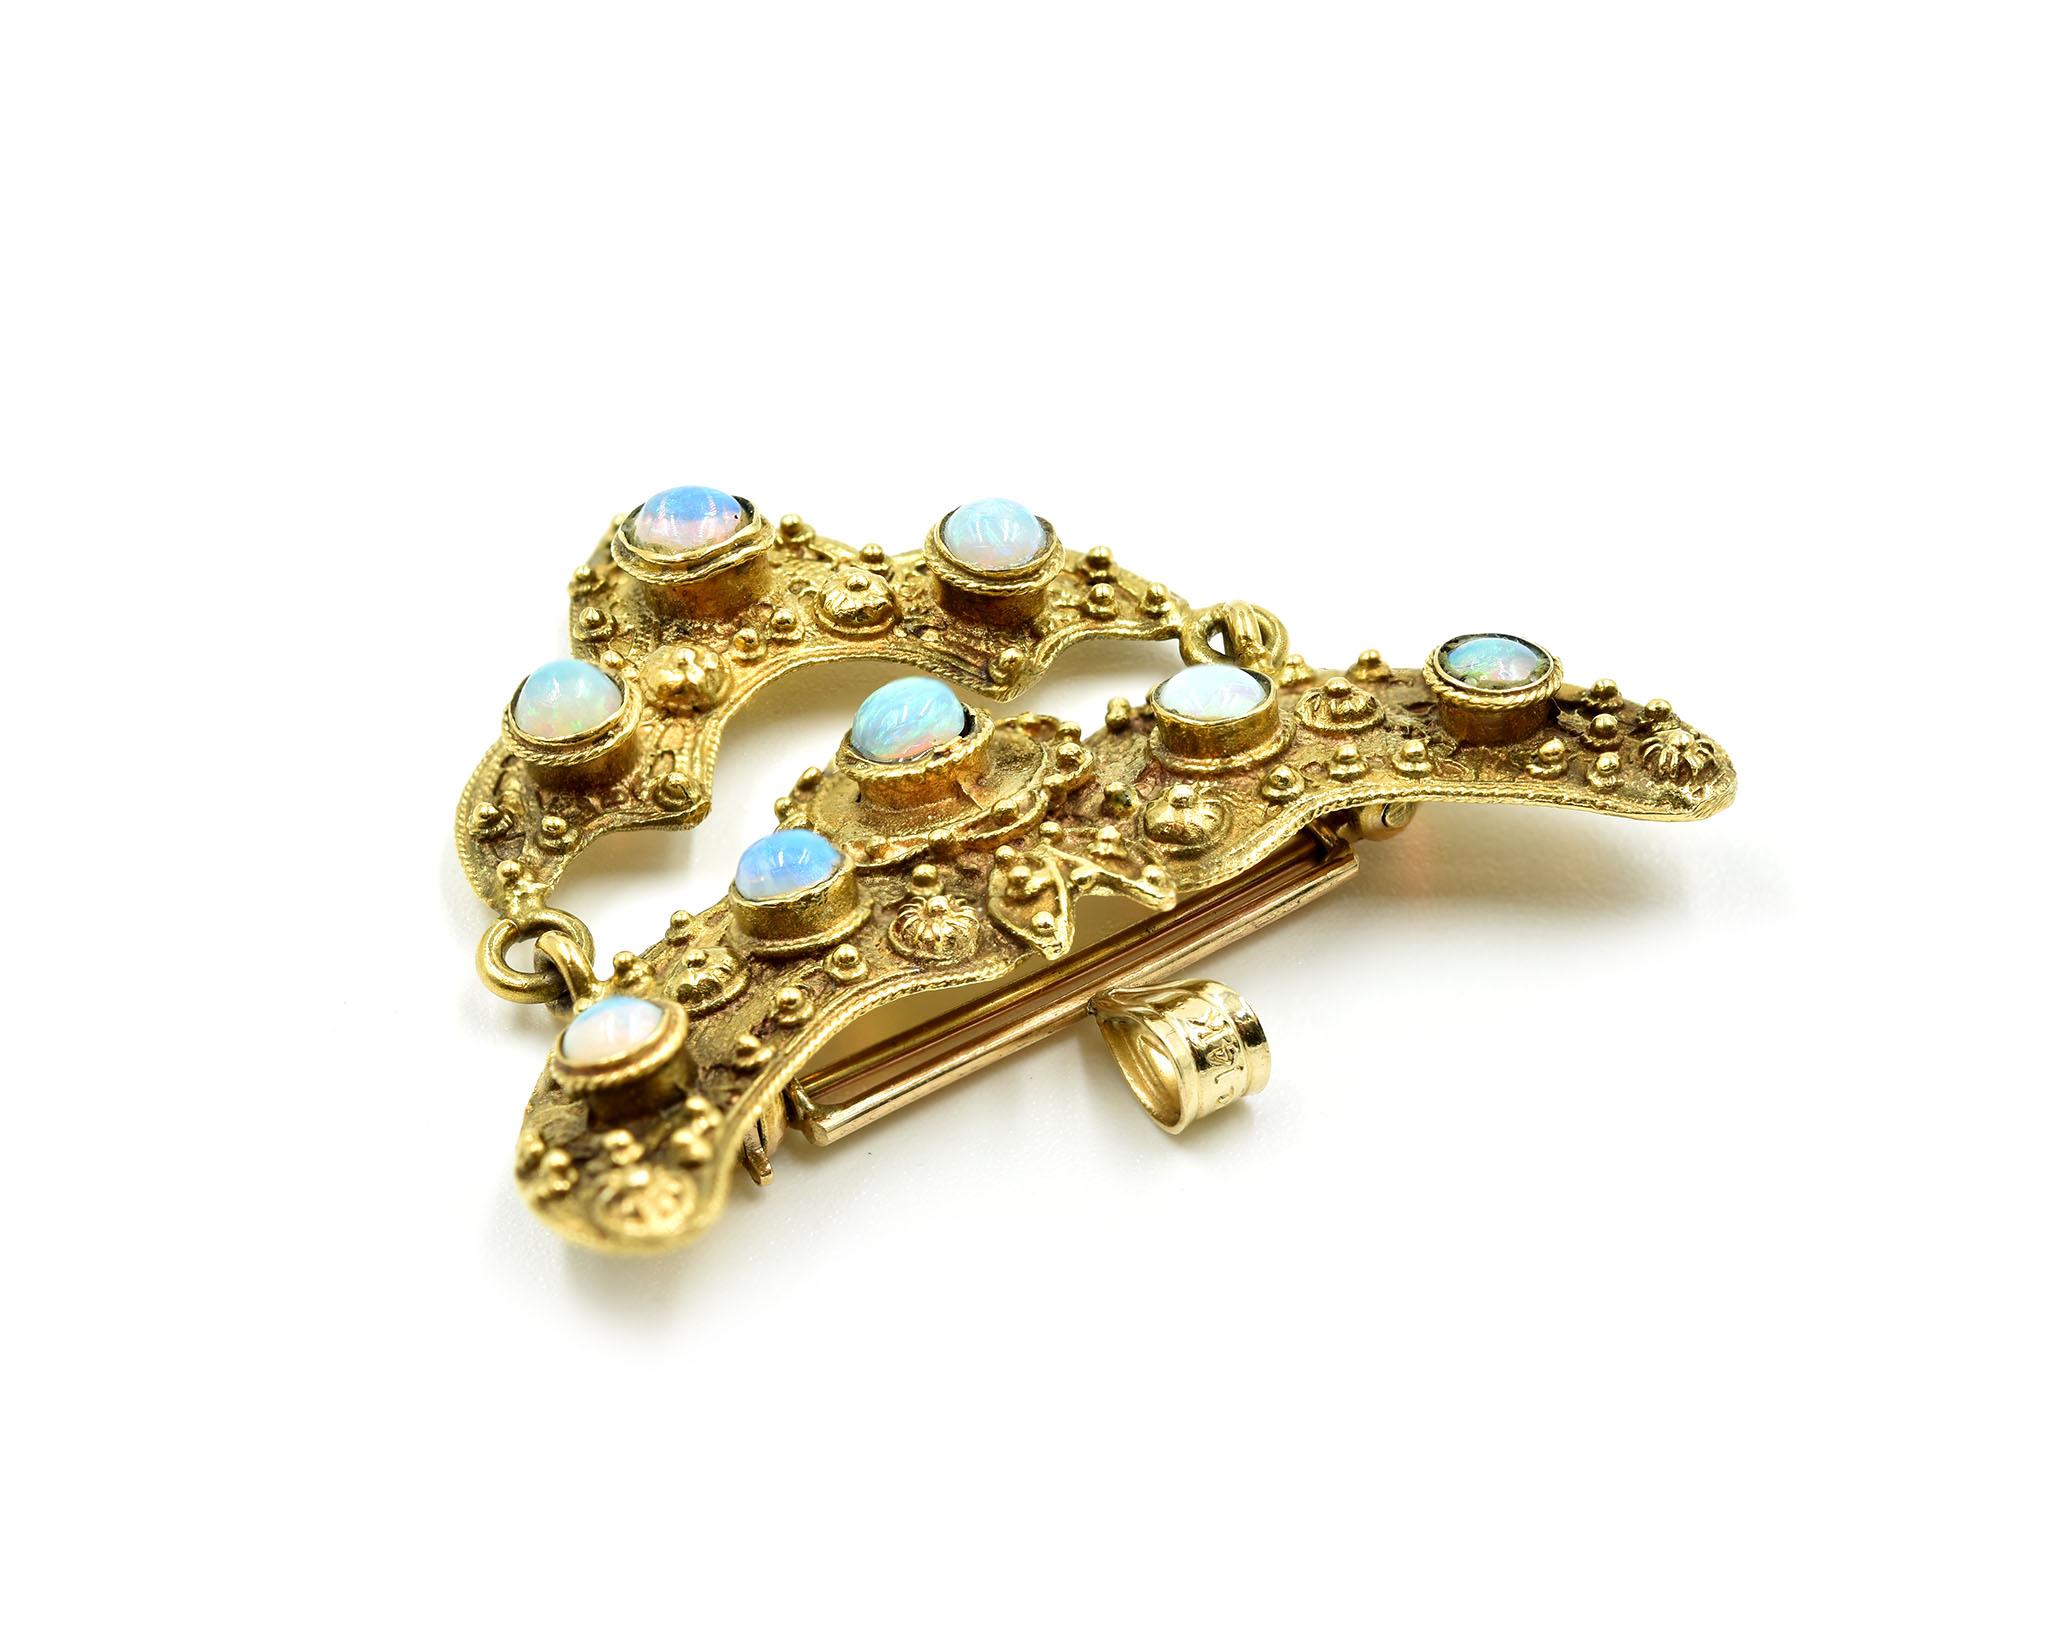 Designer: custom design
Material: 14k yellow gold
Dimensions: vintage opal pin is 1 1/4-inches long and 1 1/2-inches wide 
Weight: 5.90 grams

